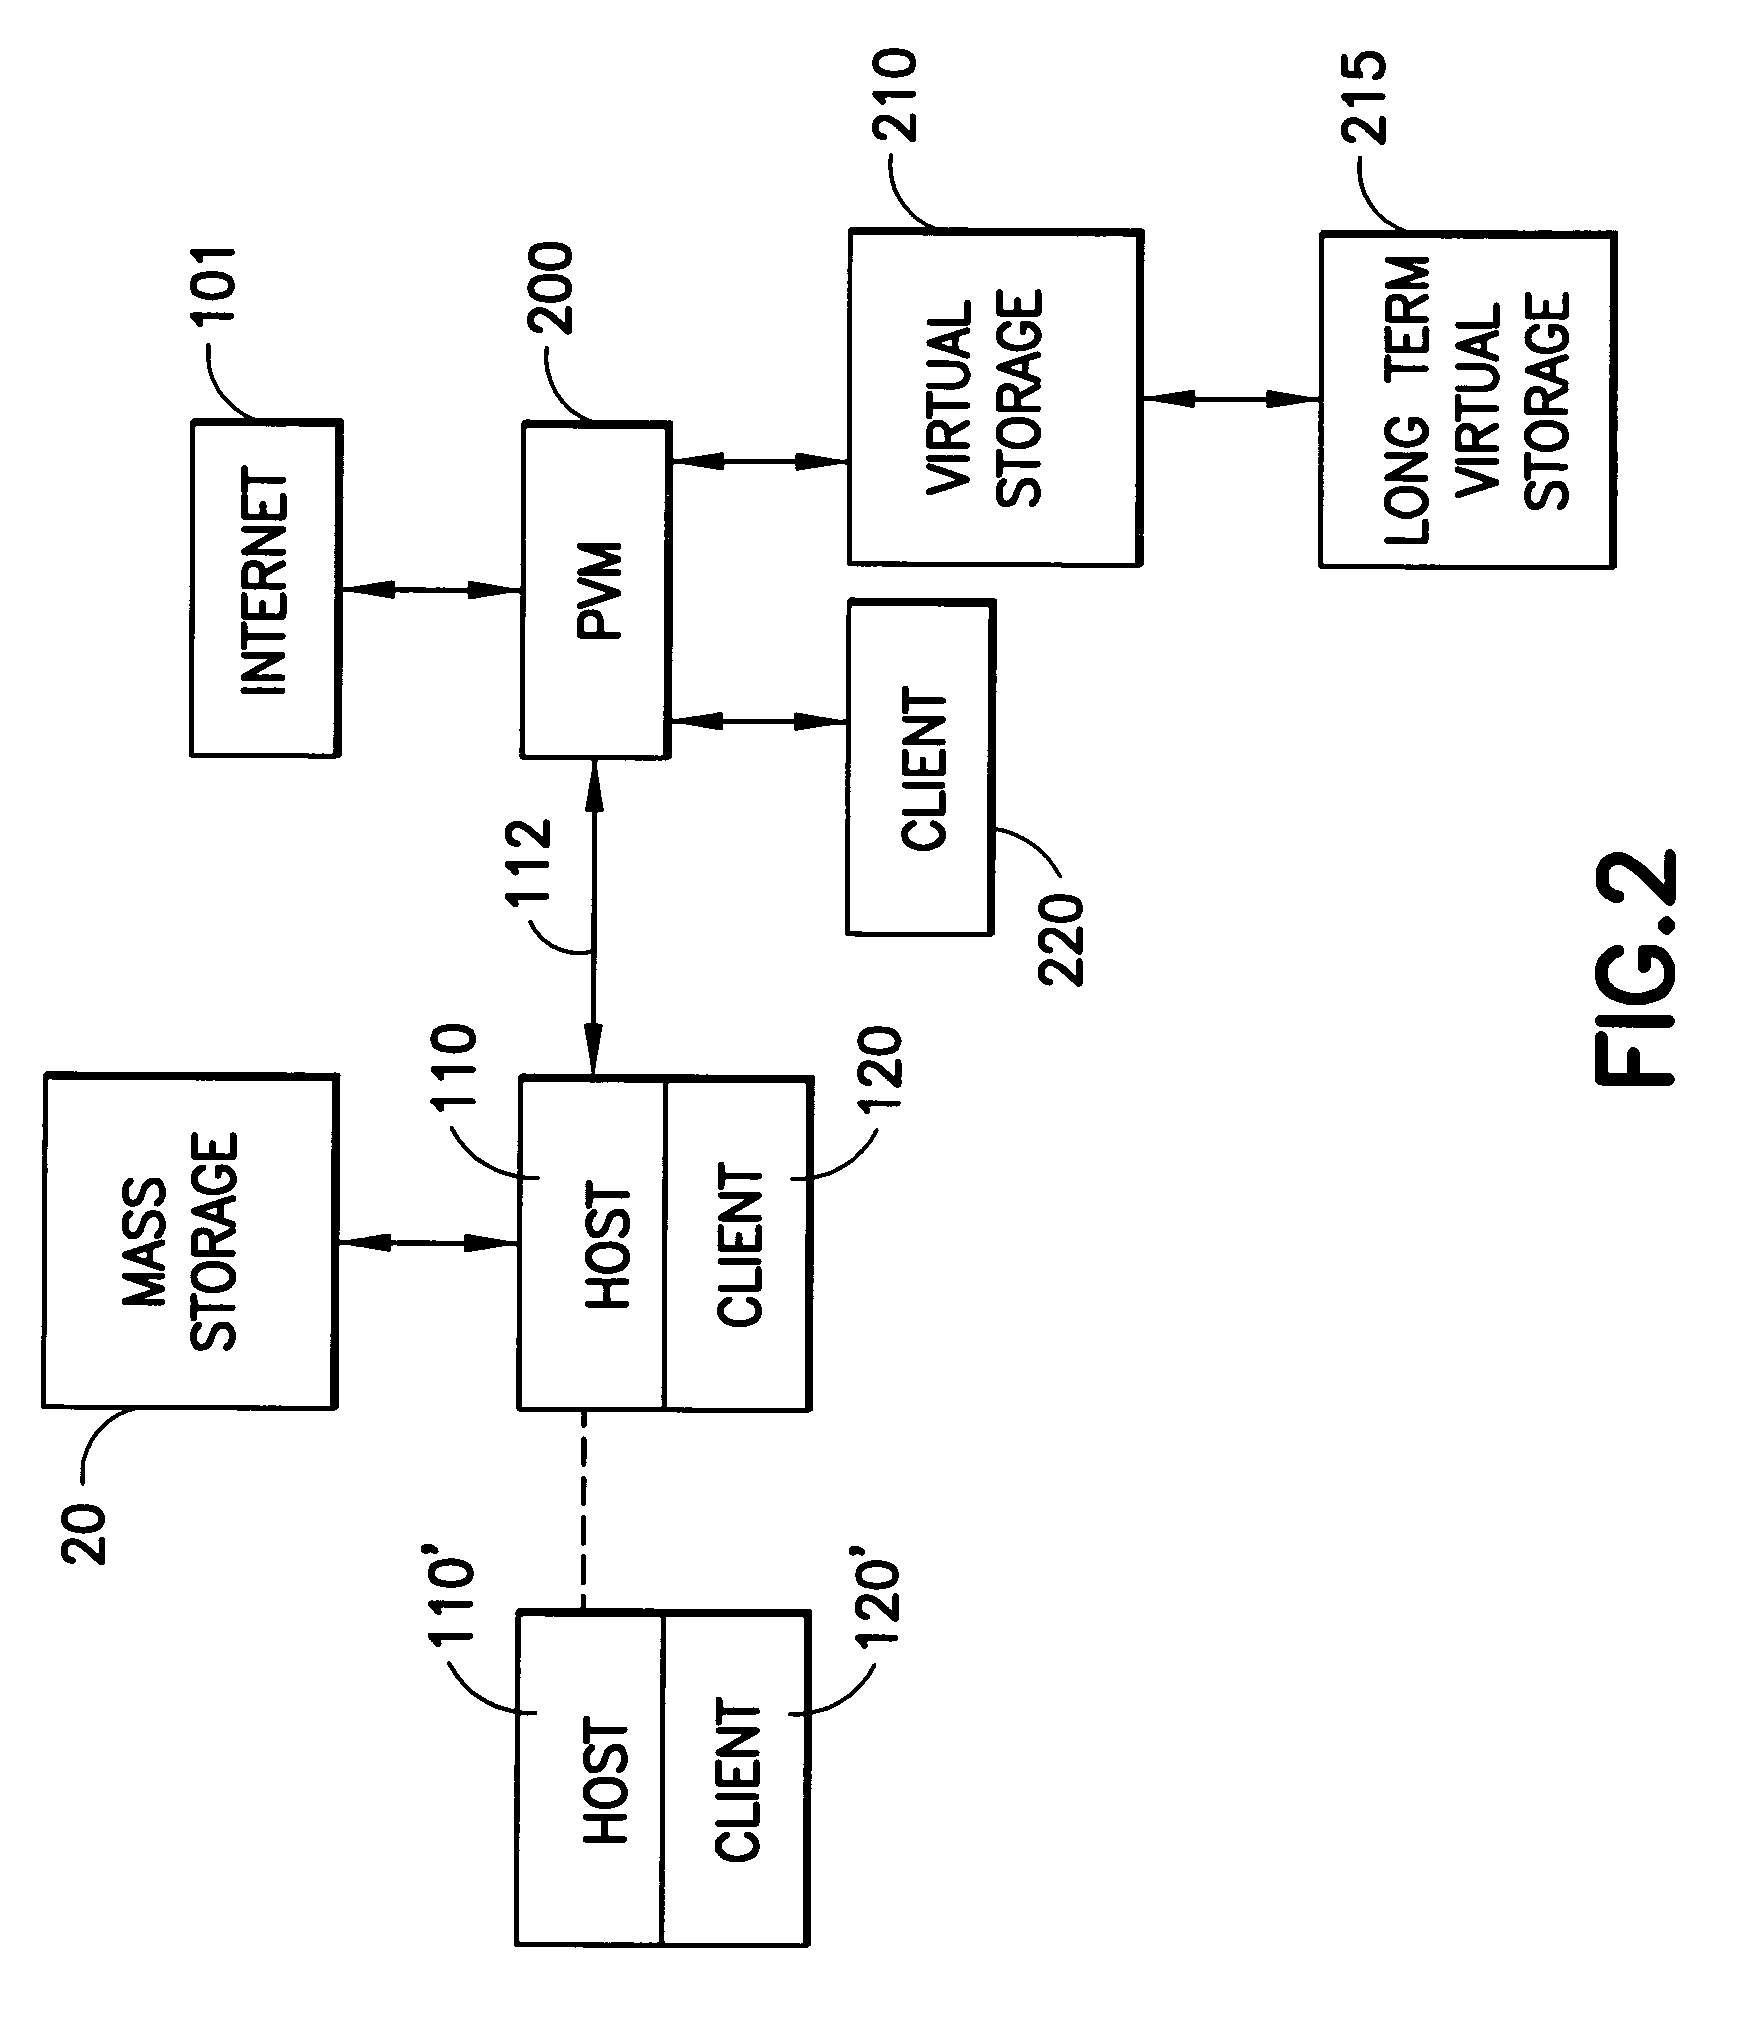 Virtualized protective communications system